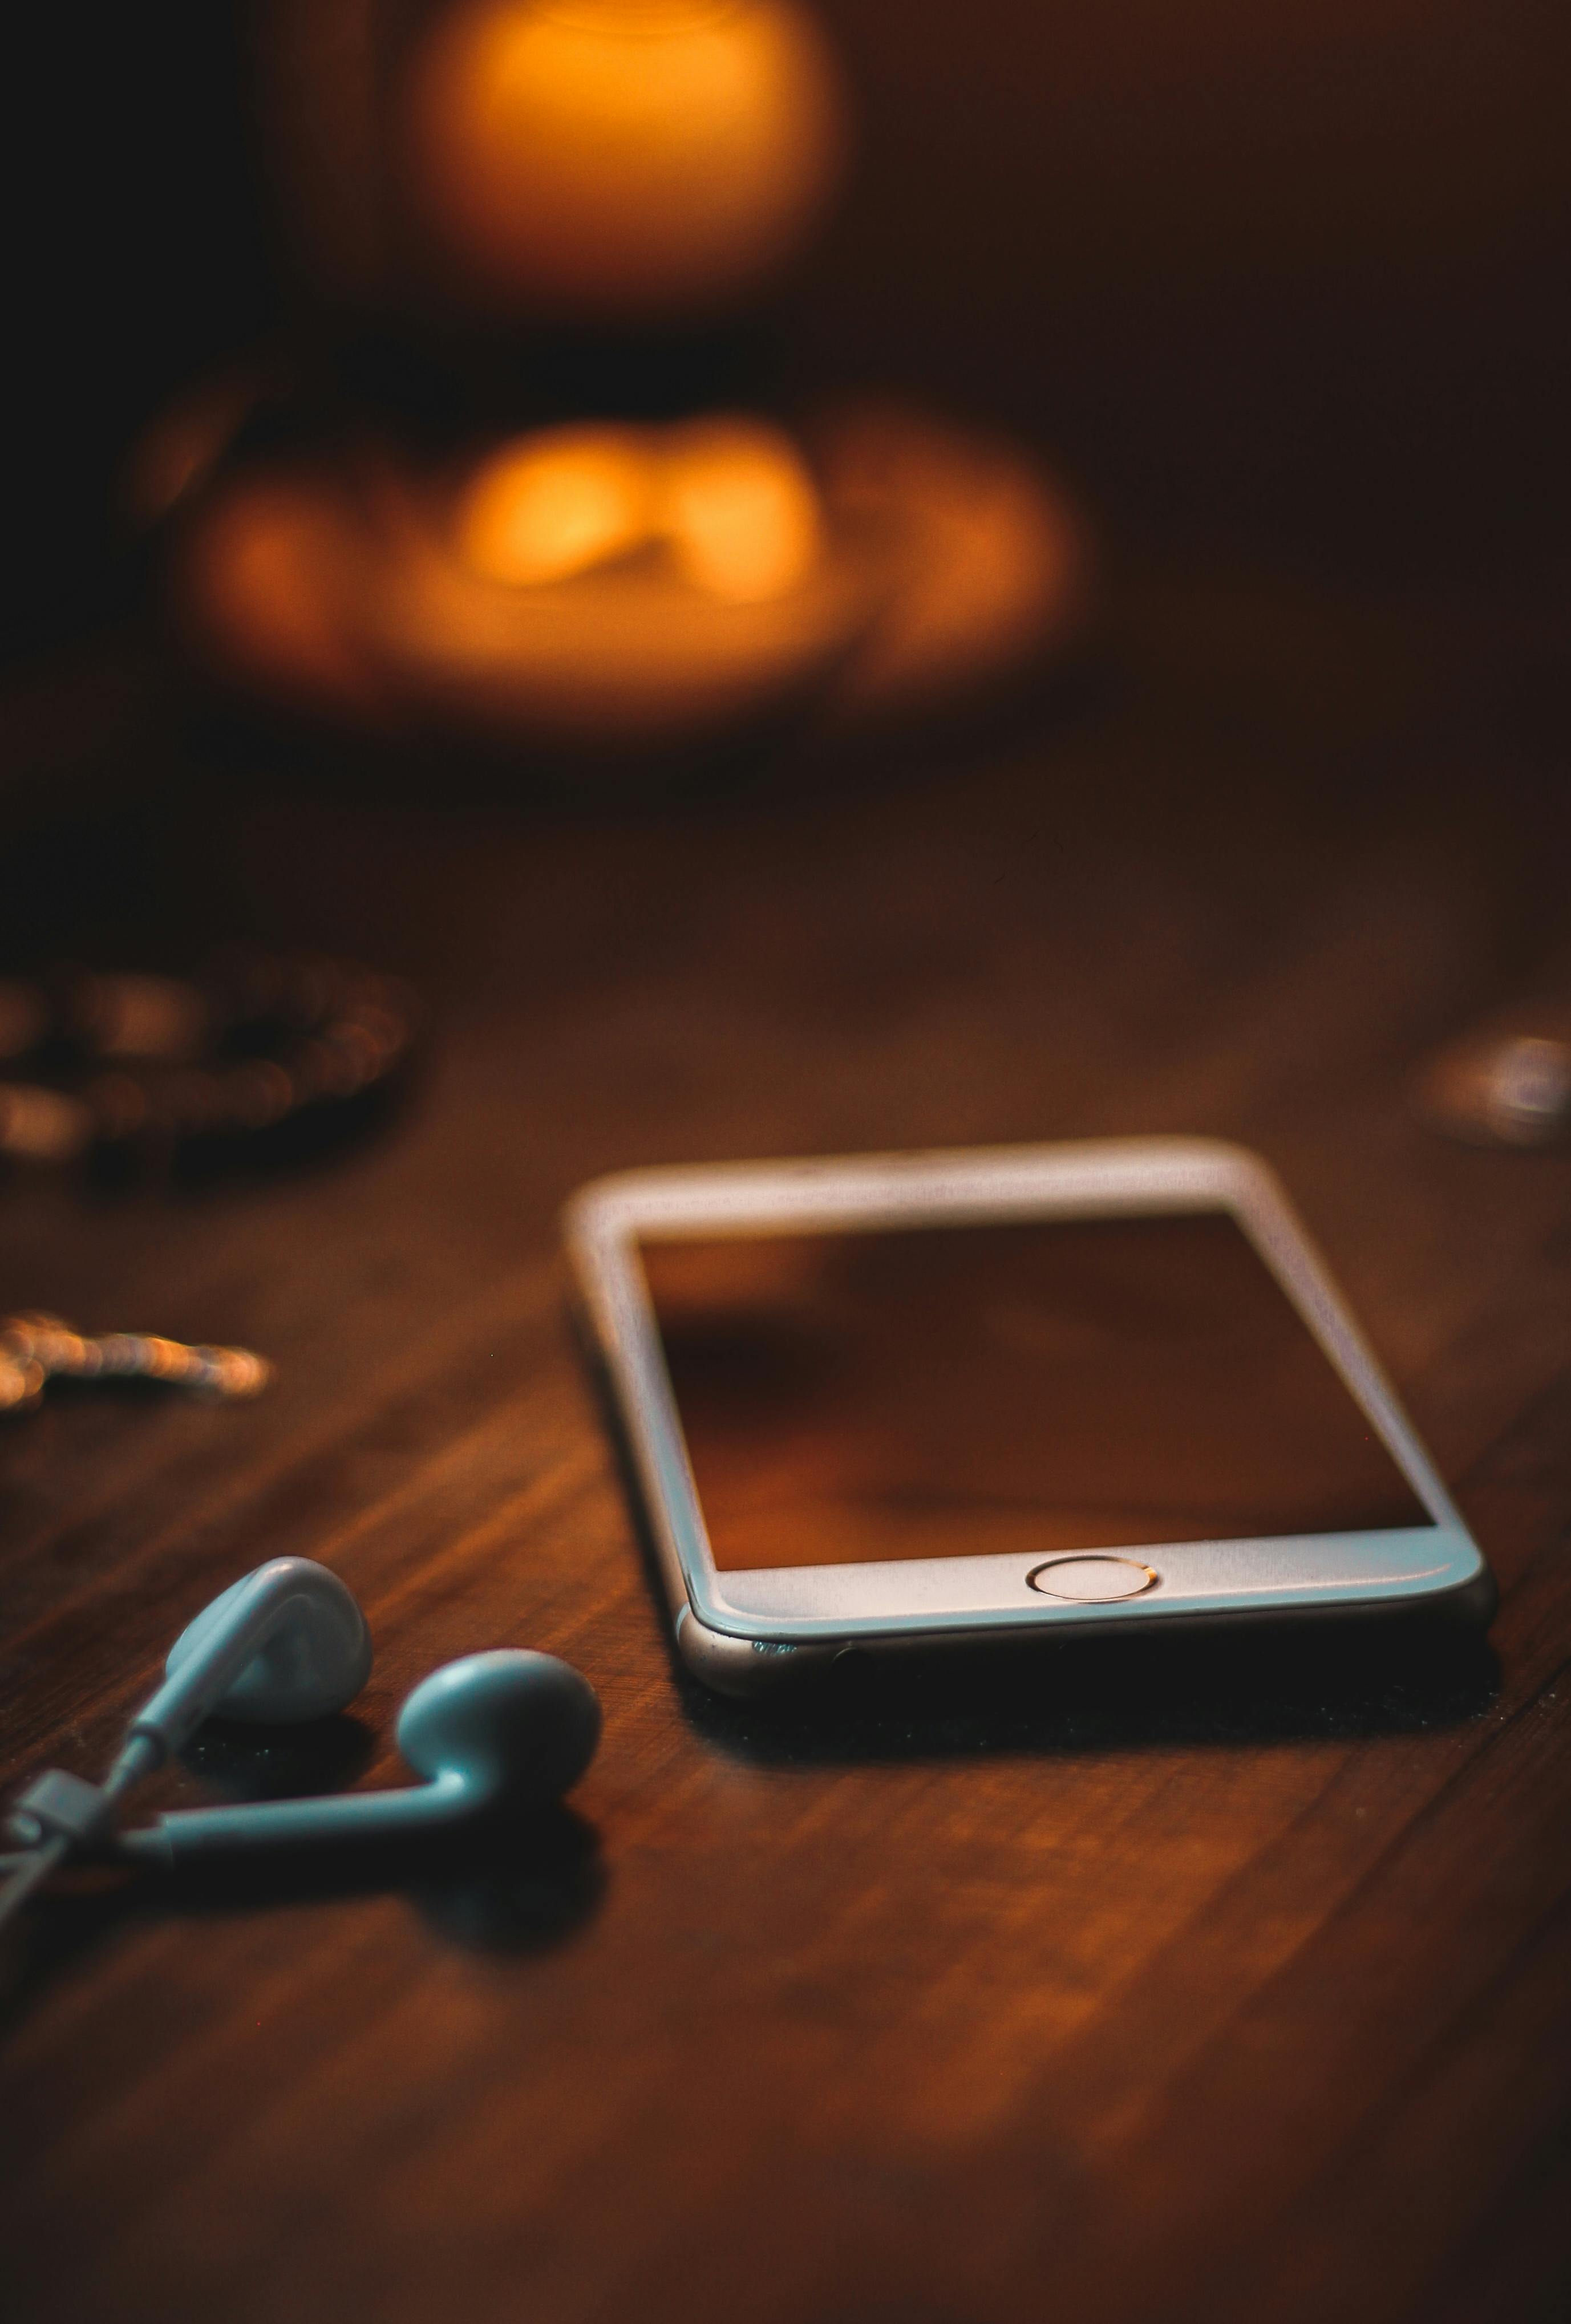 A phone on the table | Source: Pexels